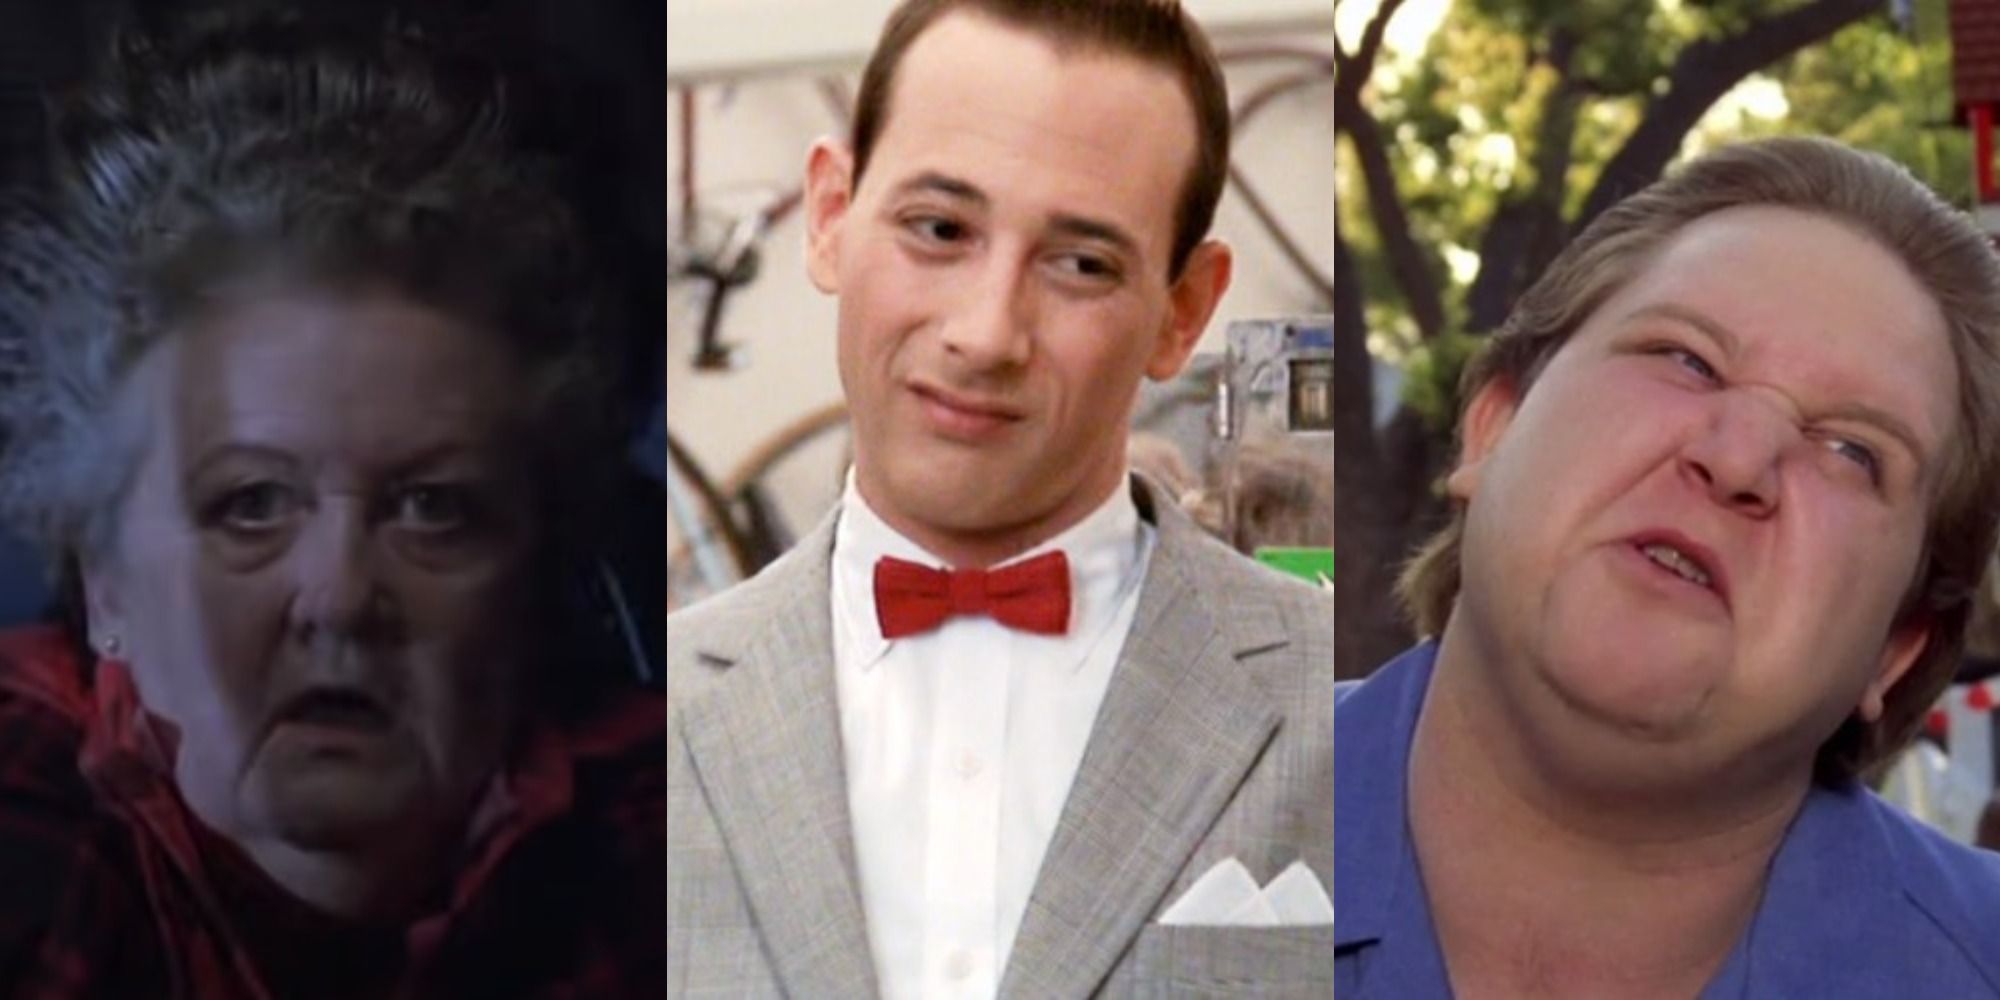 Three side by side images of Large Marge, Pee-wee and Francis from Pee-wee's Big Adventure